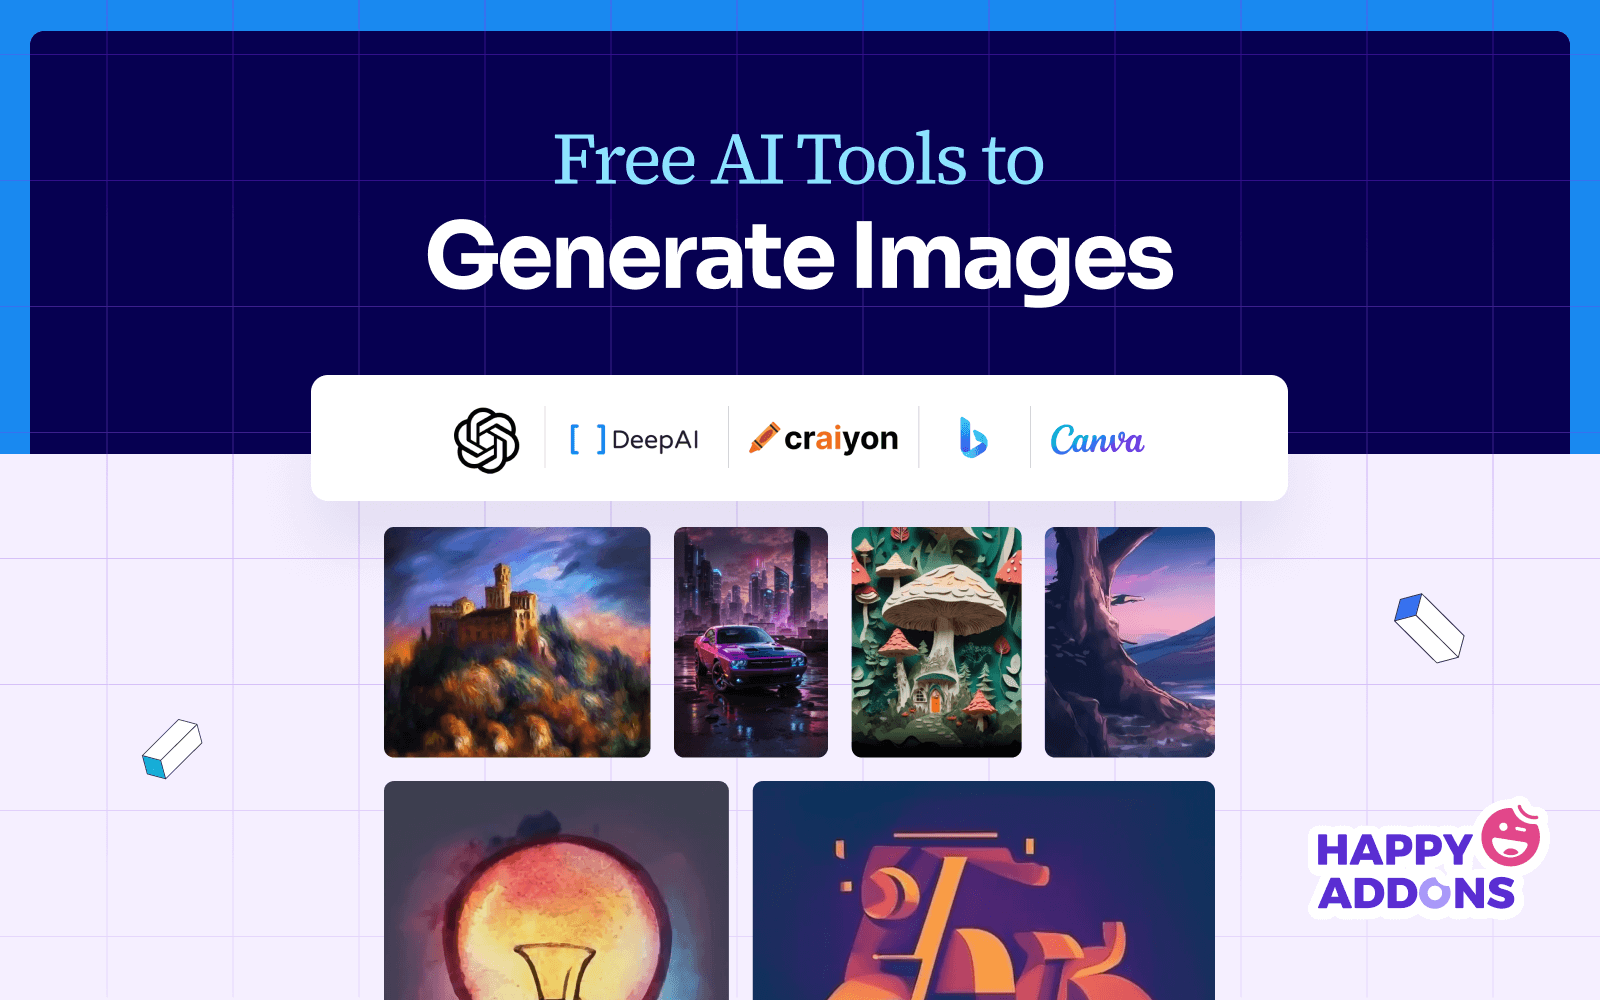 Free AI Tools to Generate Images